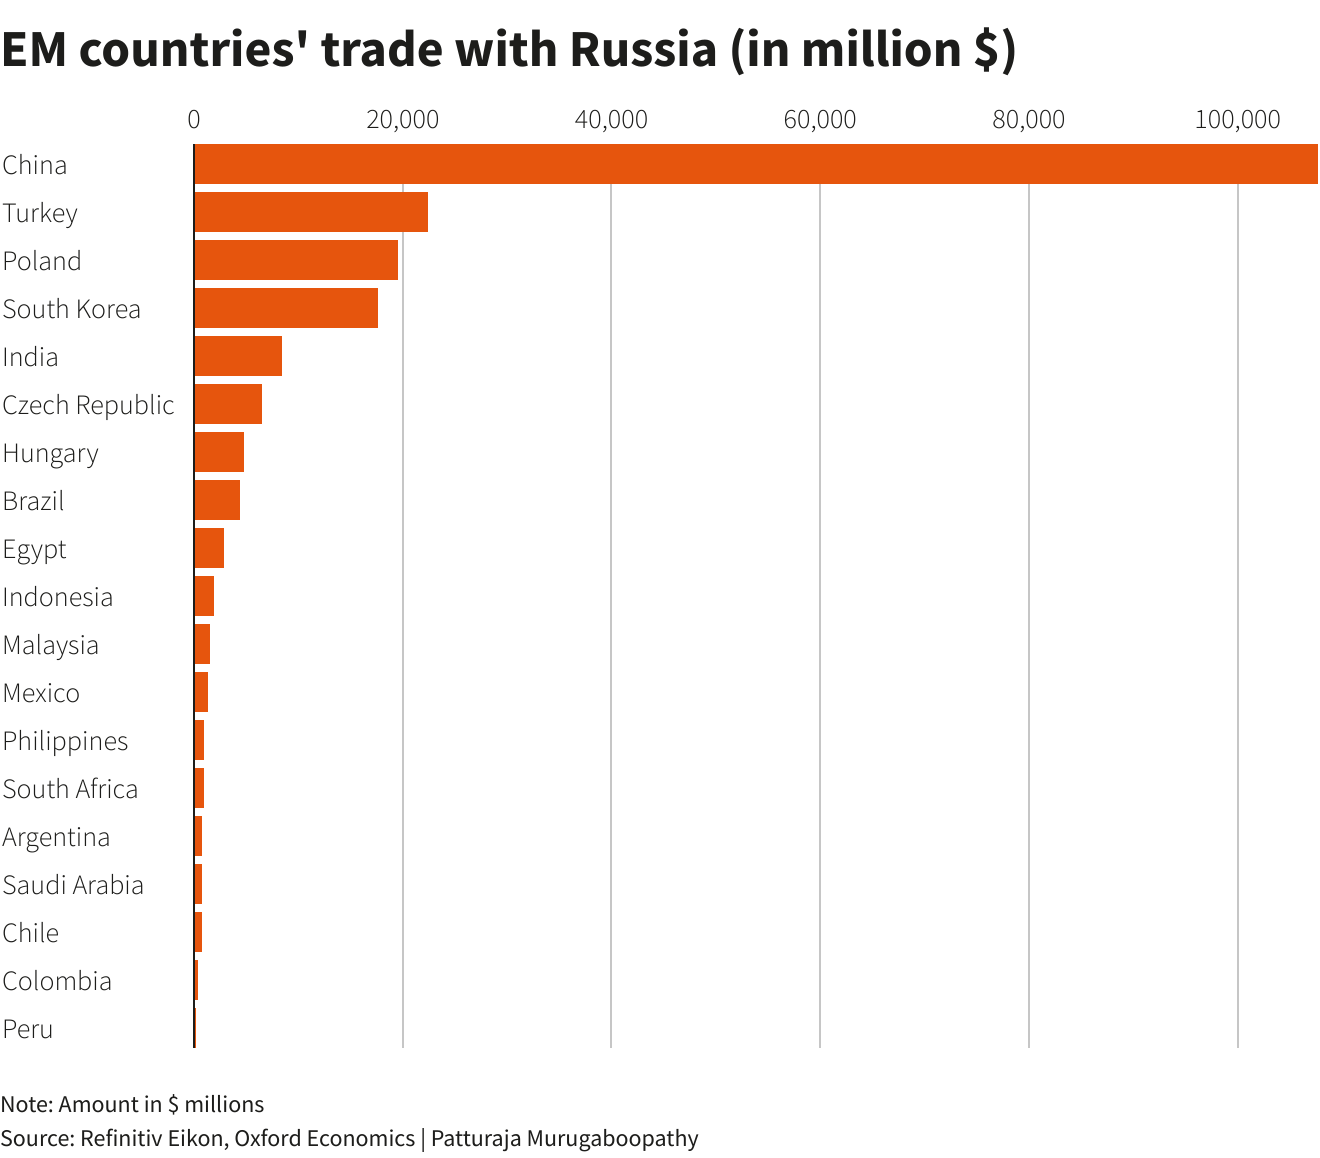 Trade of emerging countries with Russia (in millions of $)